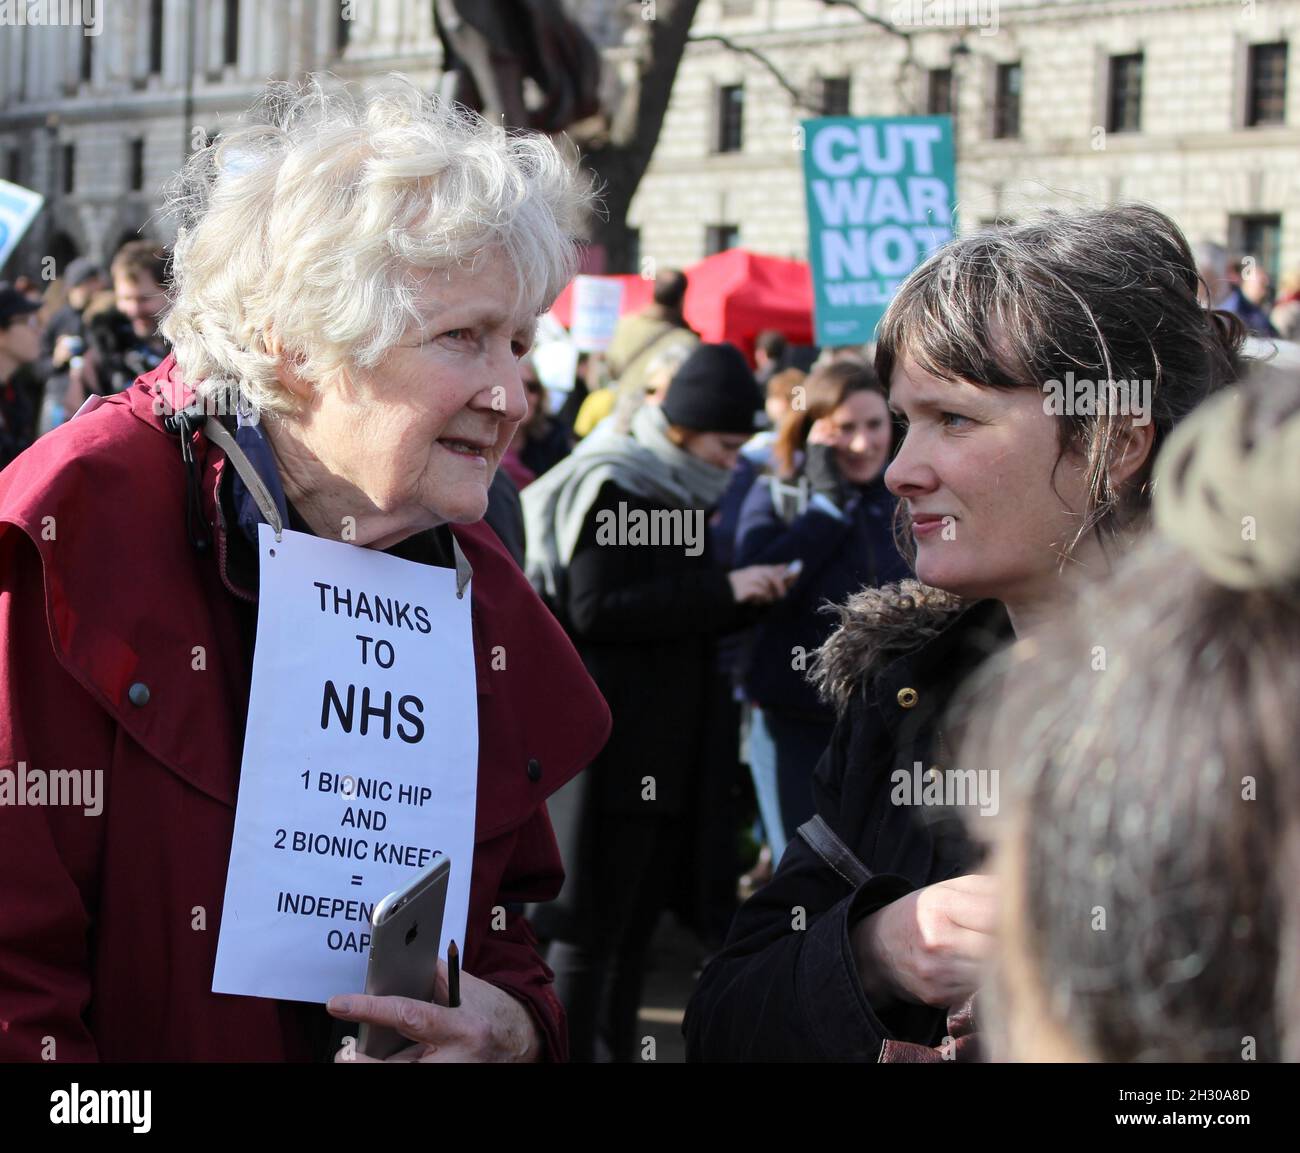 Save Our NHS march and demonstration in London - Mar 2017 Stock Photo